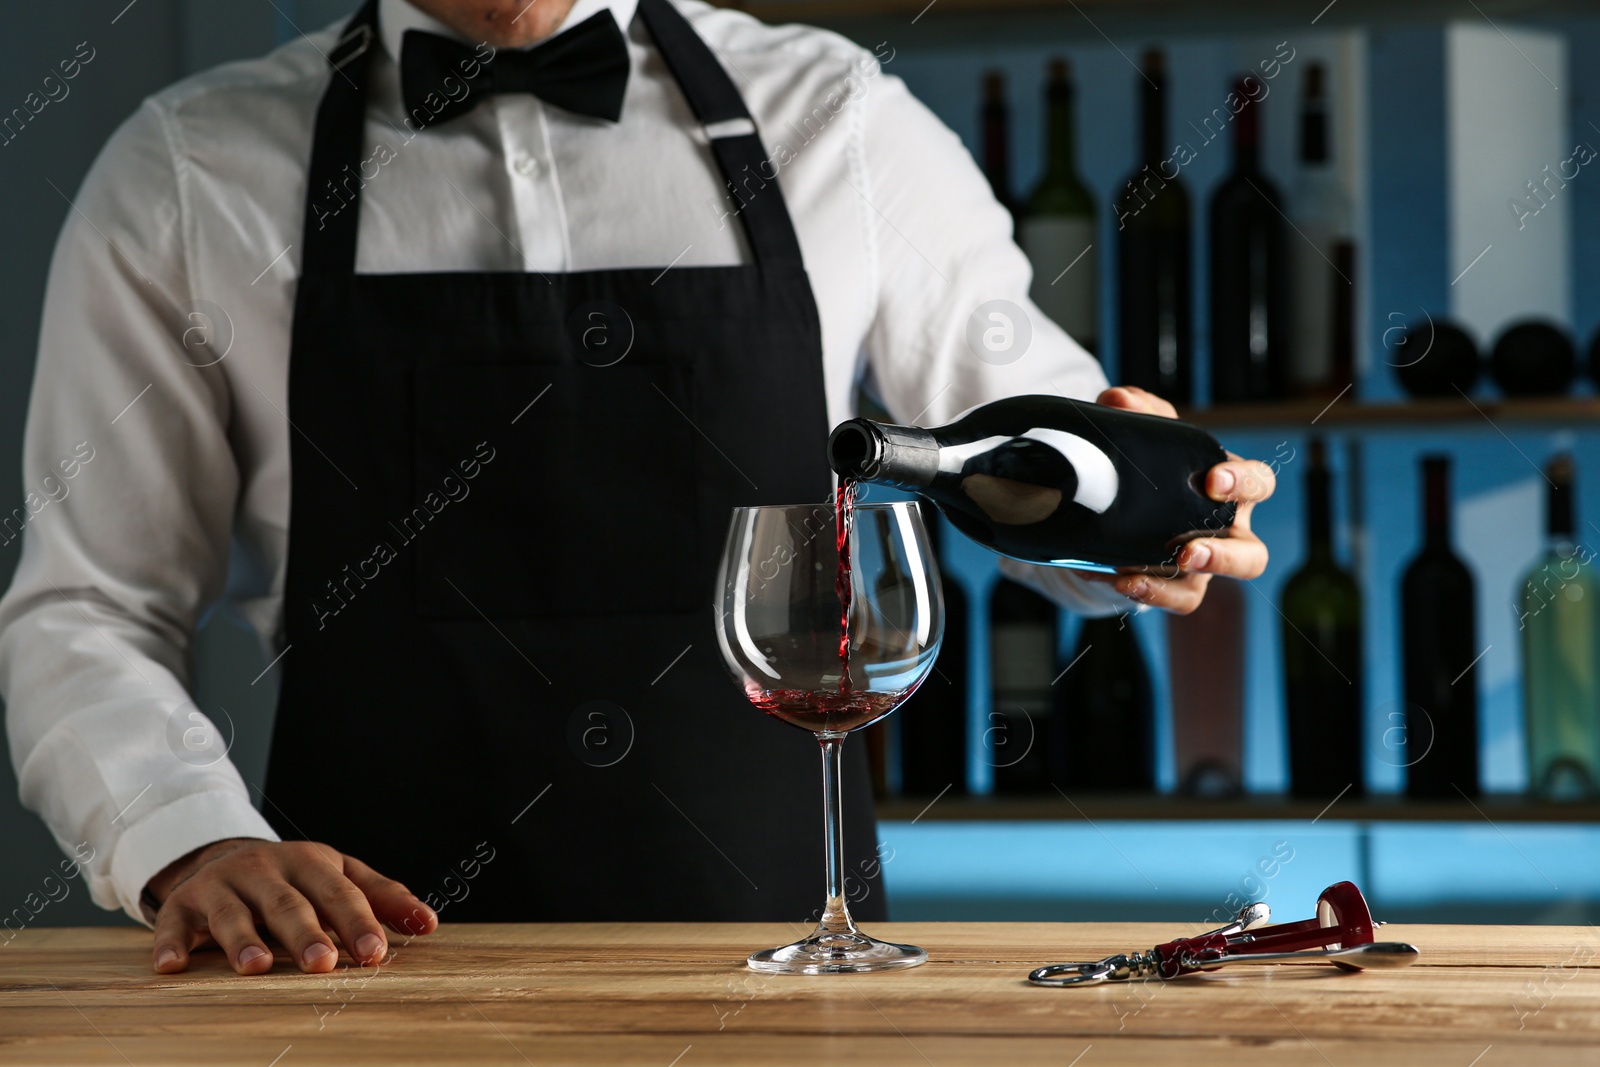 Photo of Bartender pouring wine into glass at counter in restaurant, closeup